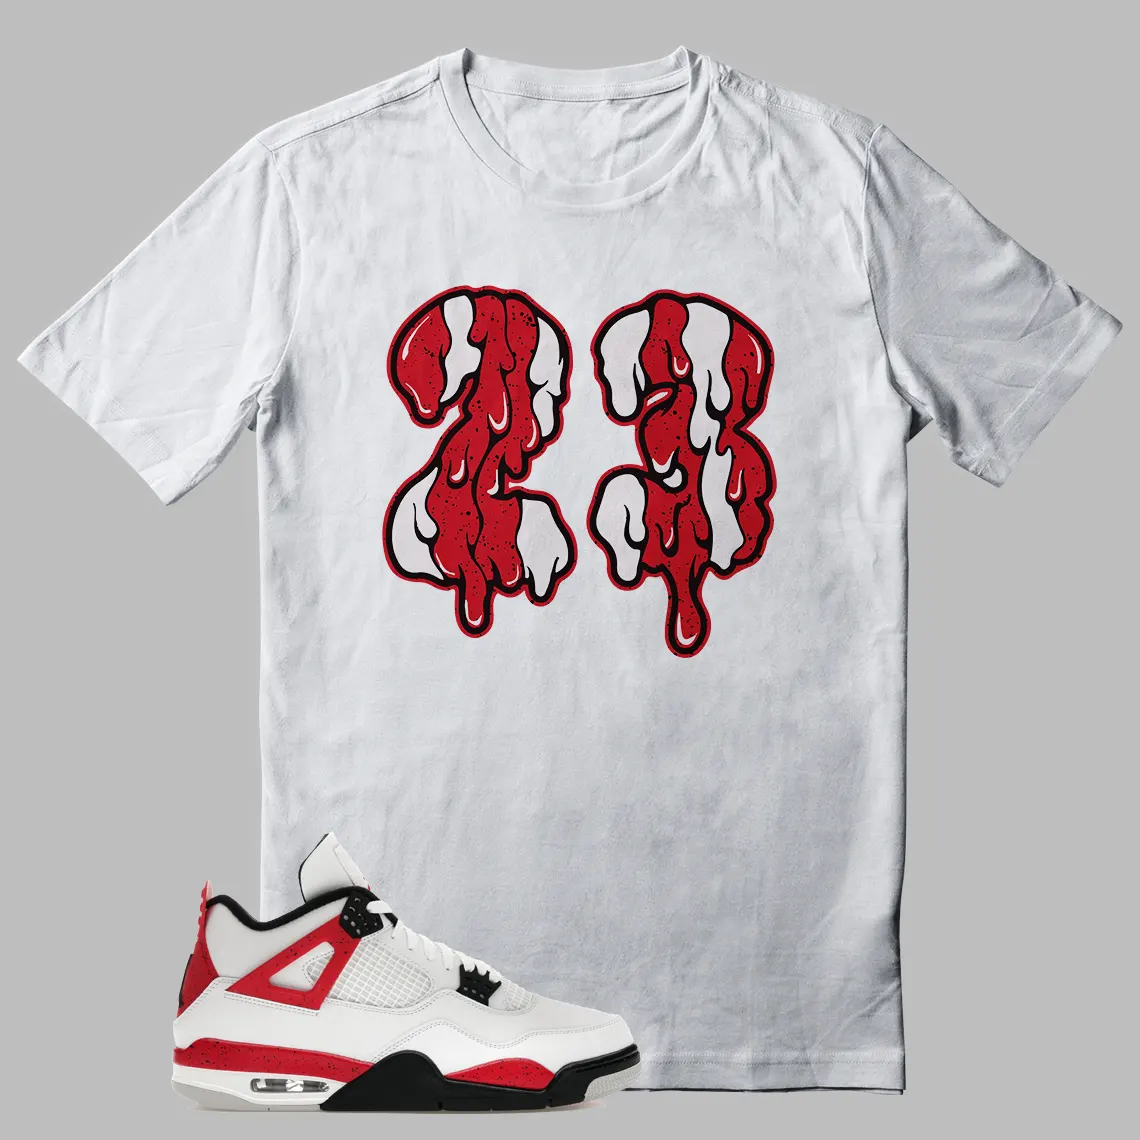 Jordan 4 Red Cement T-shirt Dripping 23 Graphic